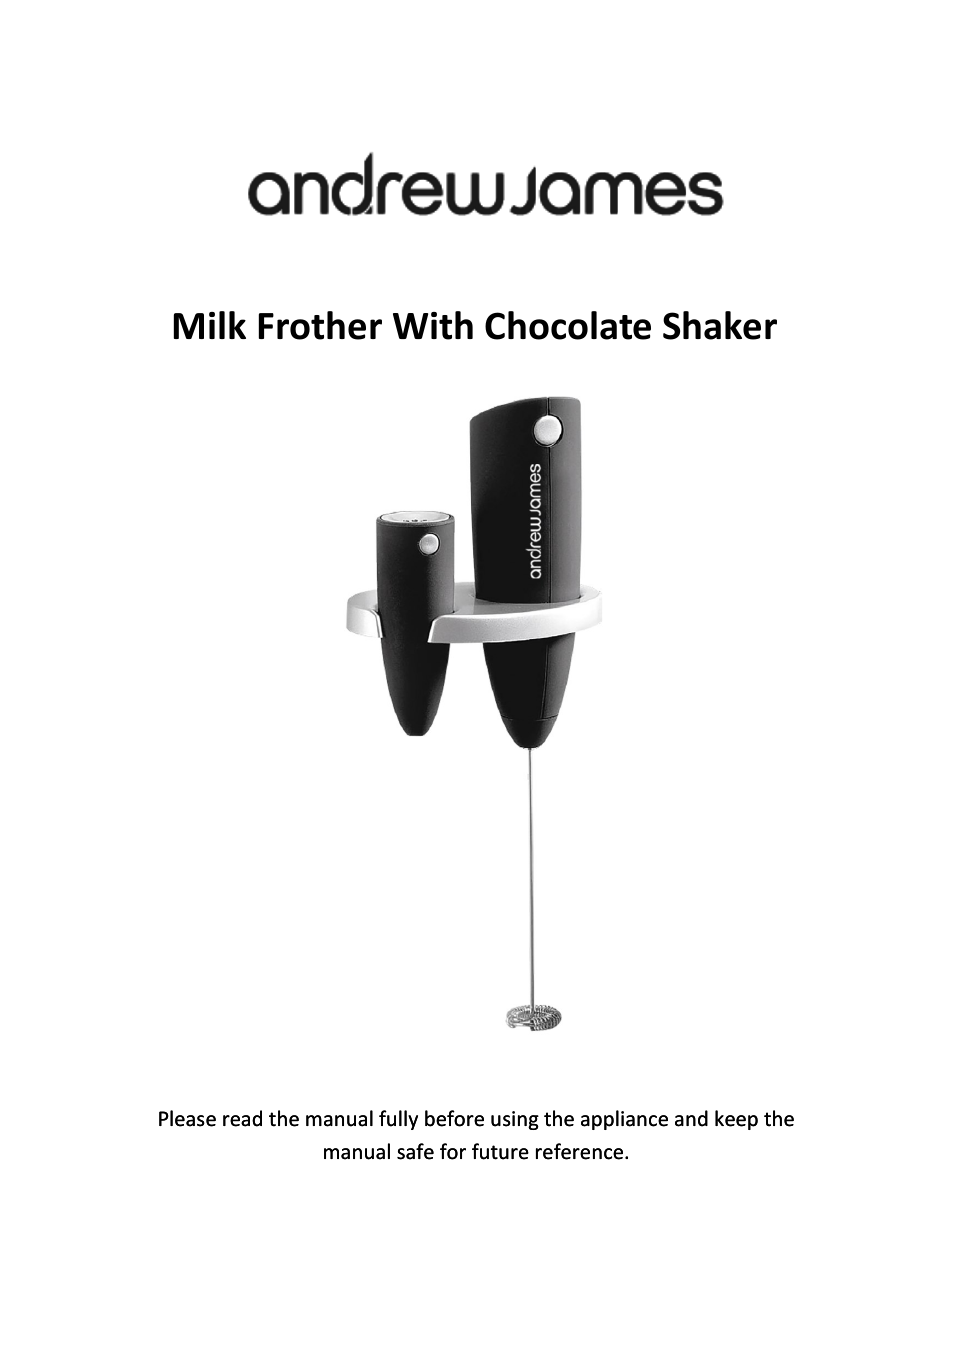 AJ000577 Milk Frother with Shaker and Wall Mount